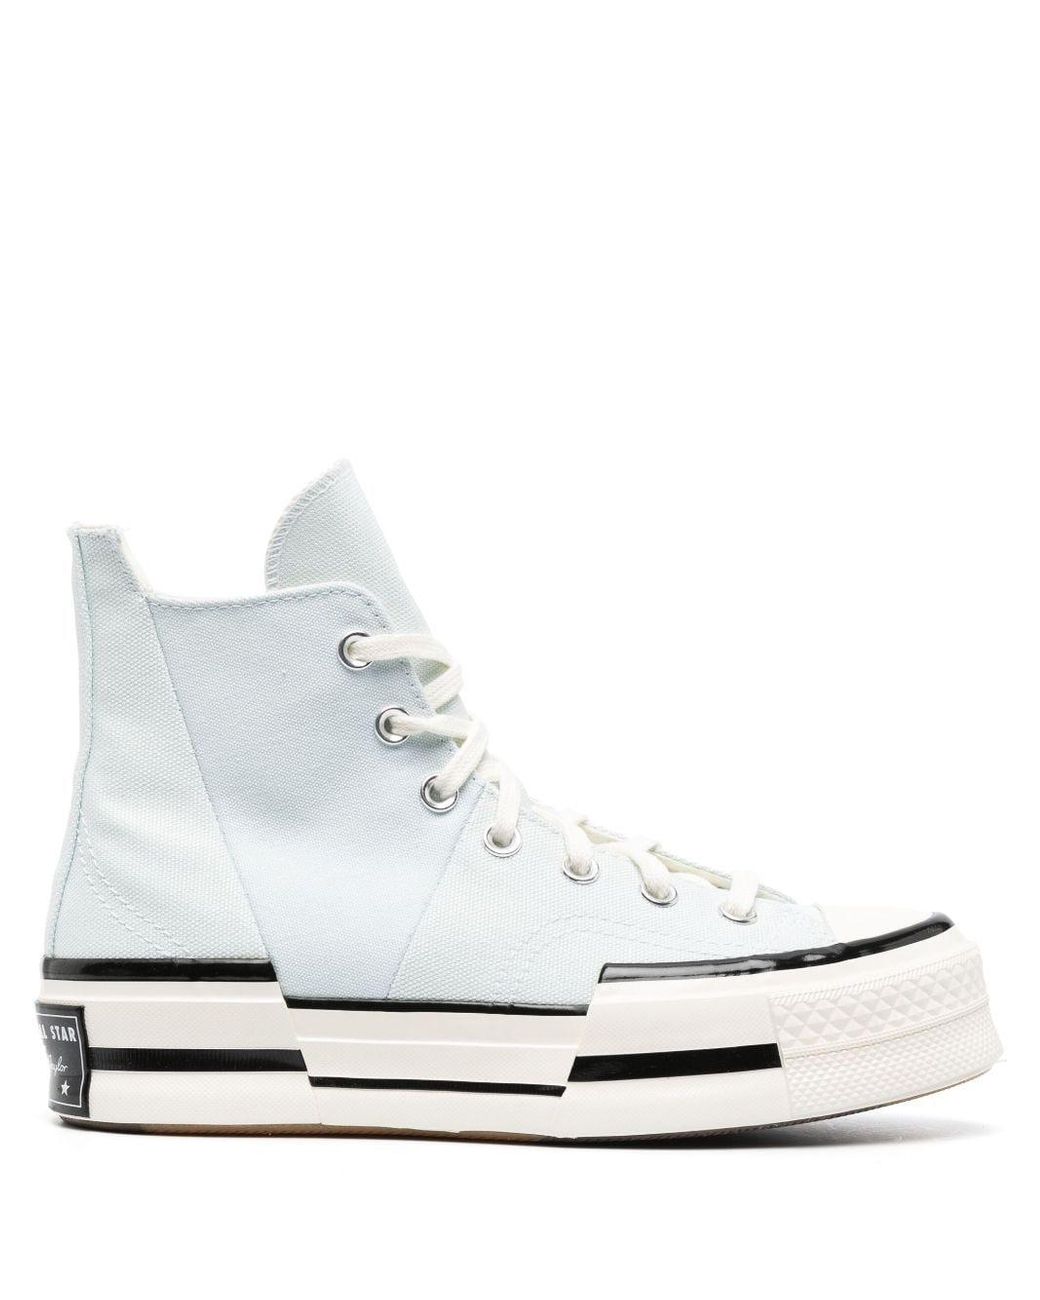 Converse Chuck 70 Plus Sneakers in White | Lyst